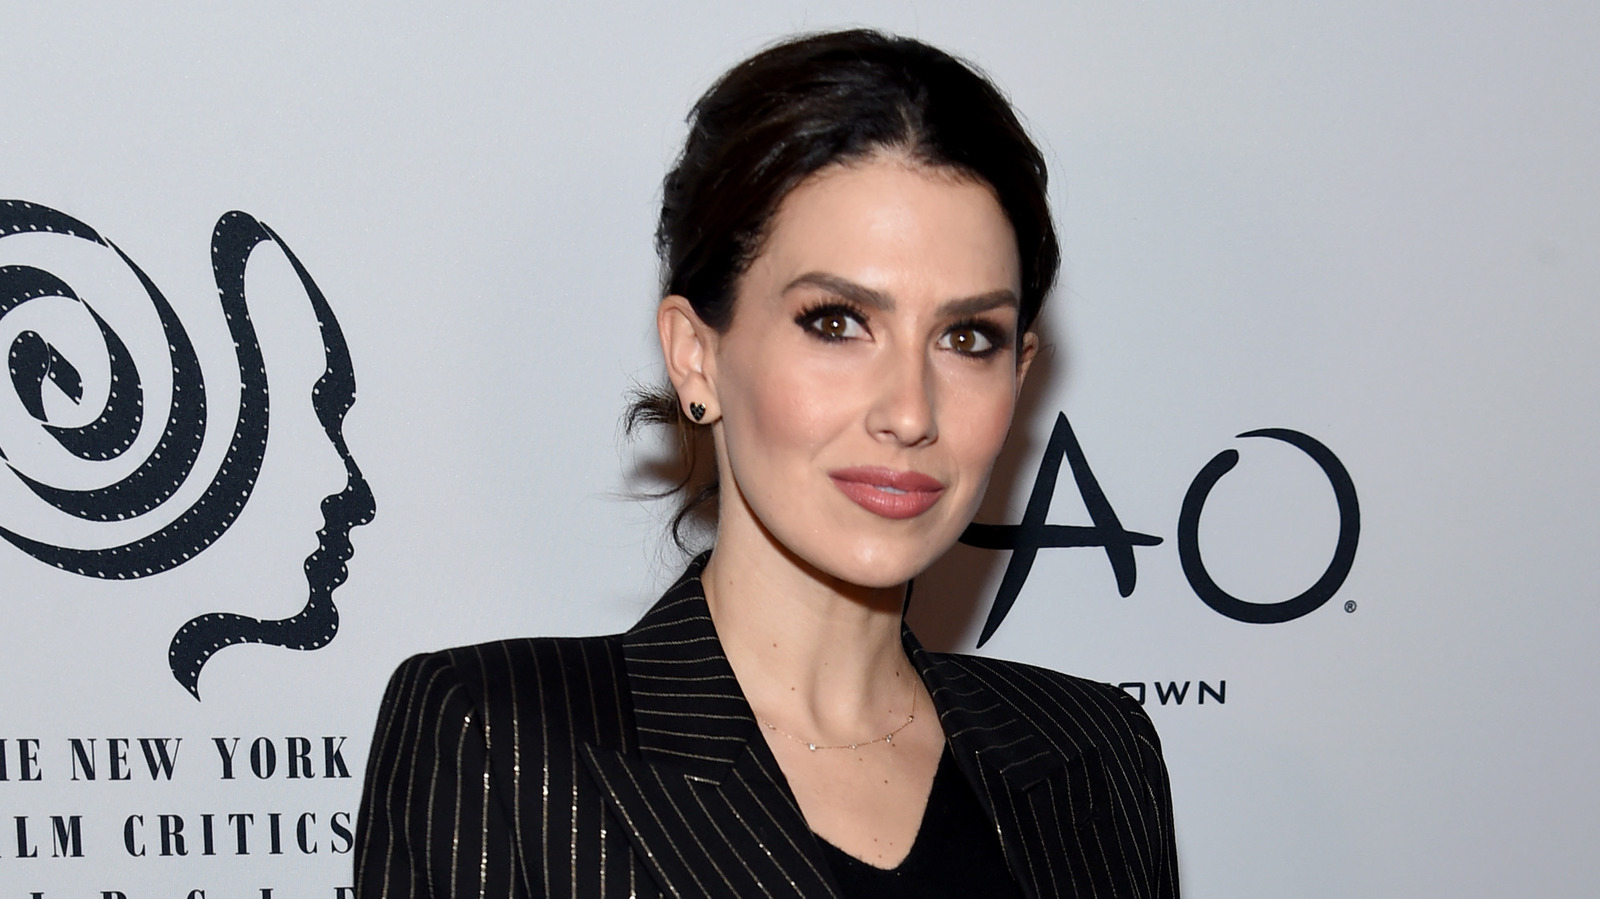 The Latest Details On The Hilaria Baldwin Scandal Are Turning Heads